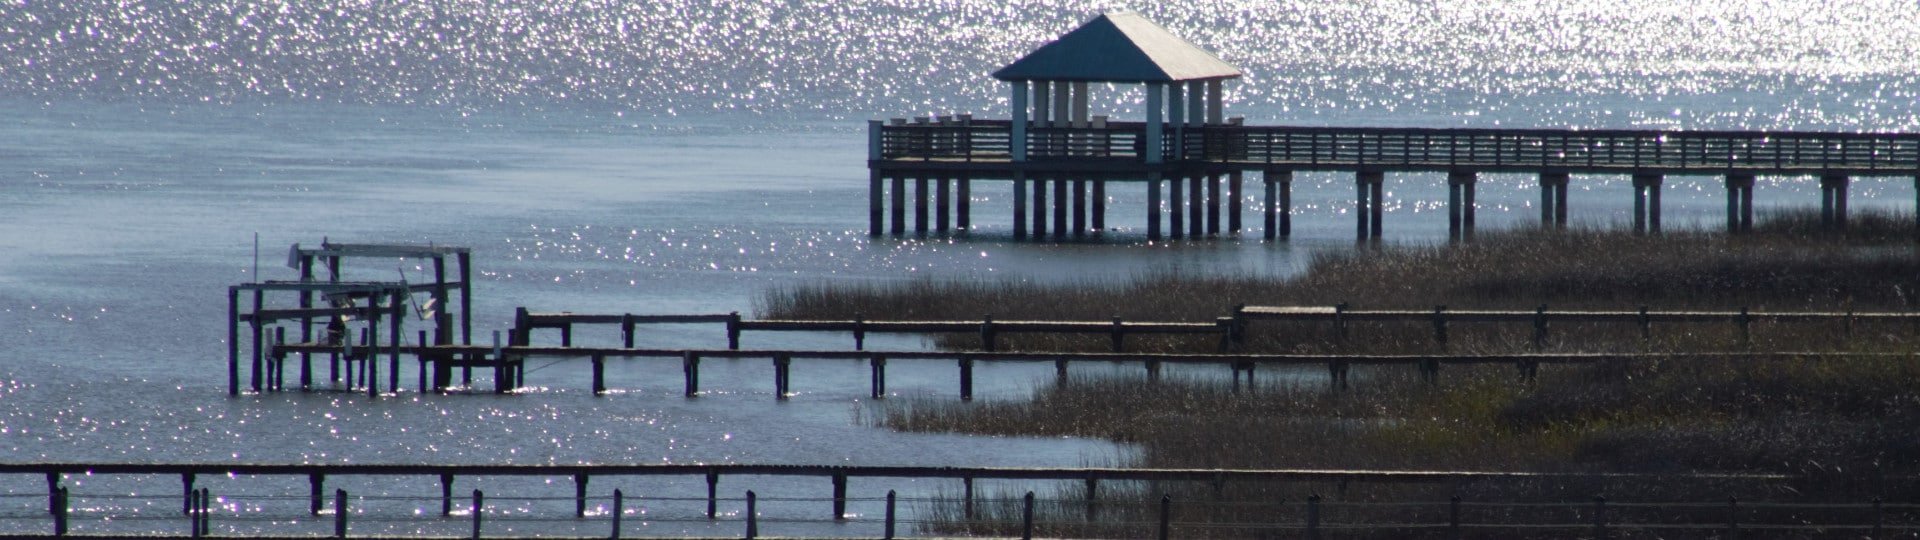 Piers for Fishing in Apalachicola Florida